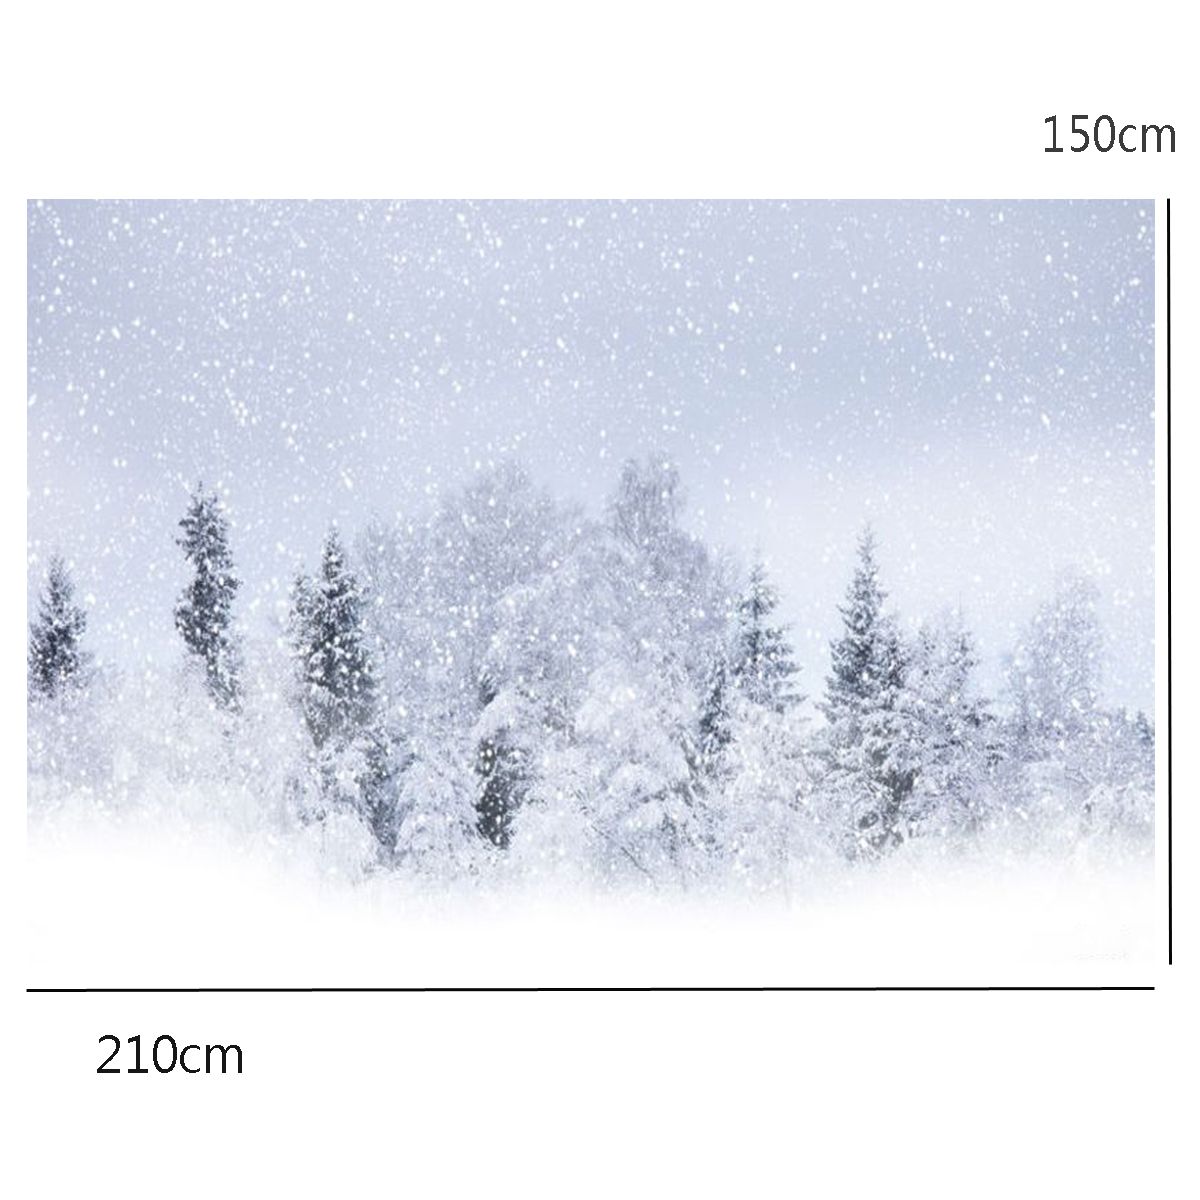 7x5FT-Snow-Covered-Forest-Photography-Background-Studio-Backdrop-21x15m-1237951